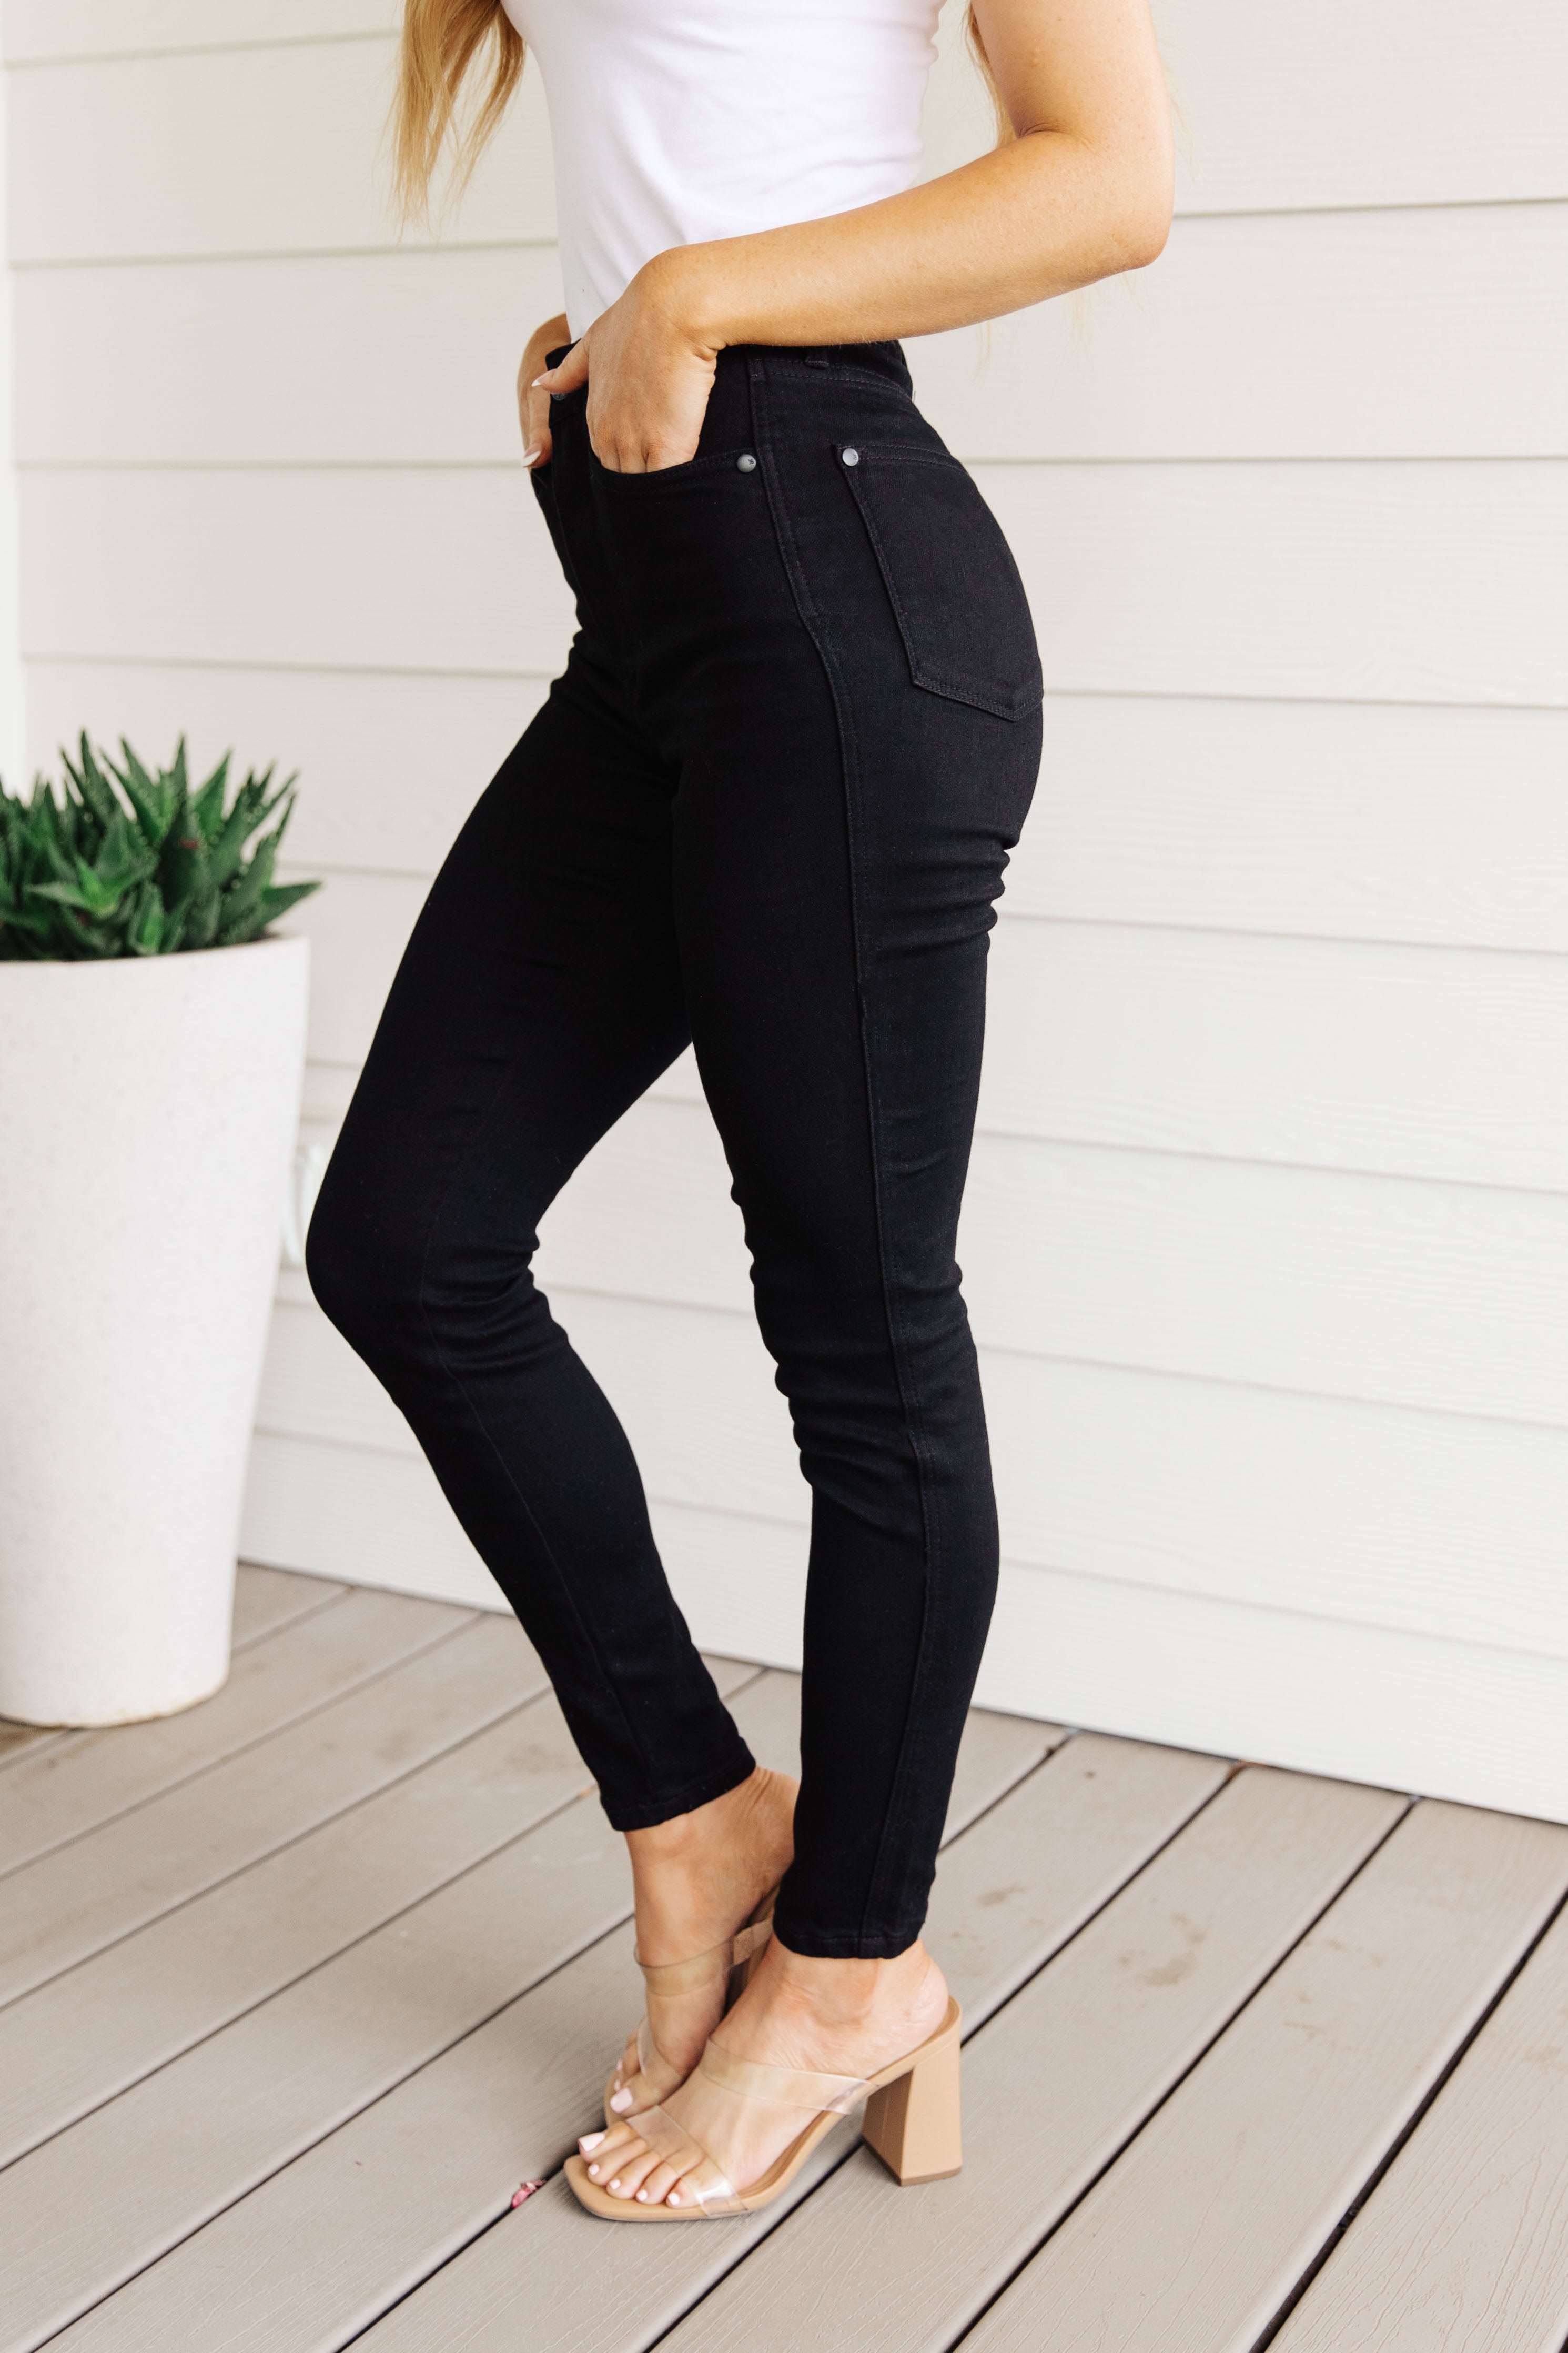 Judy Blue Black Audrey High Rise Tummy Control Top Classic Skinny Jeans Ave Shops